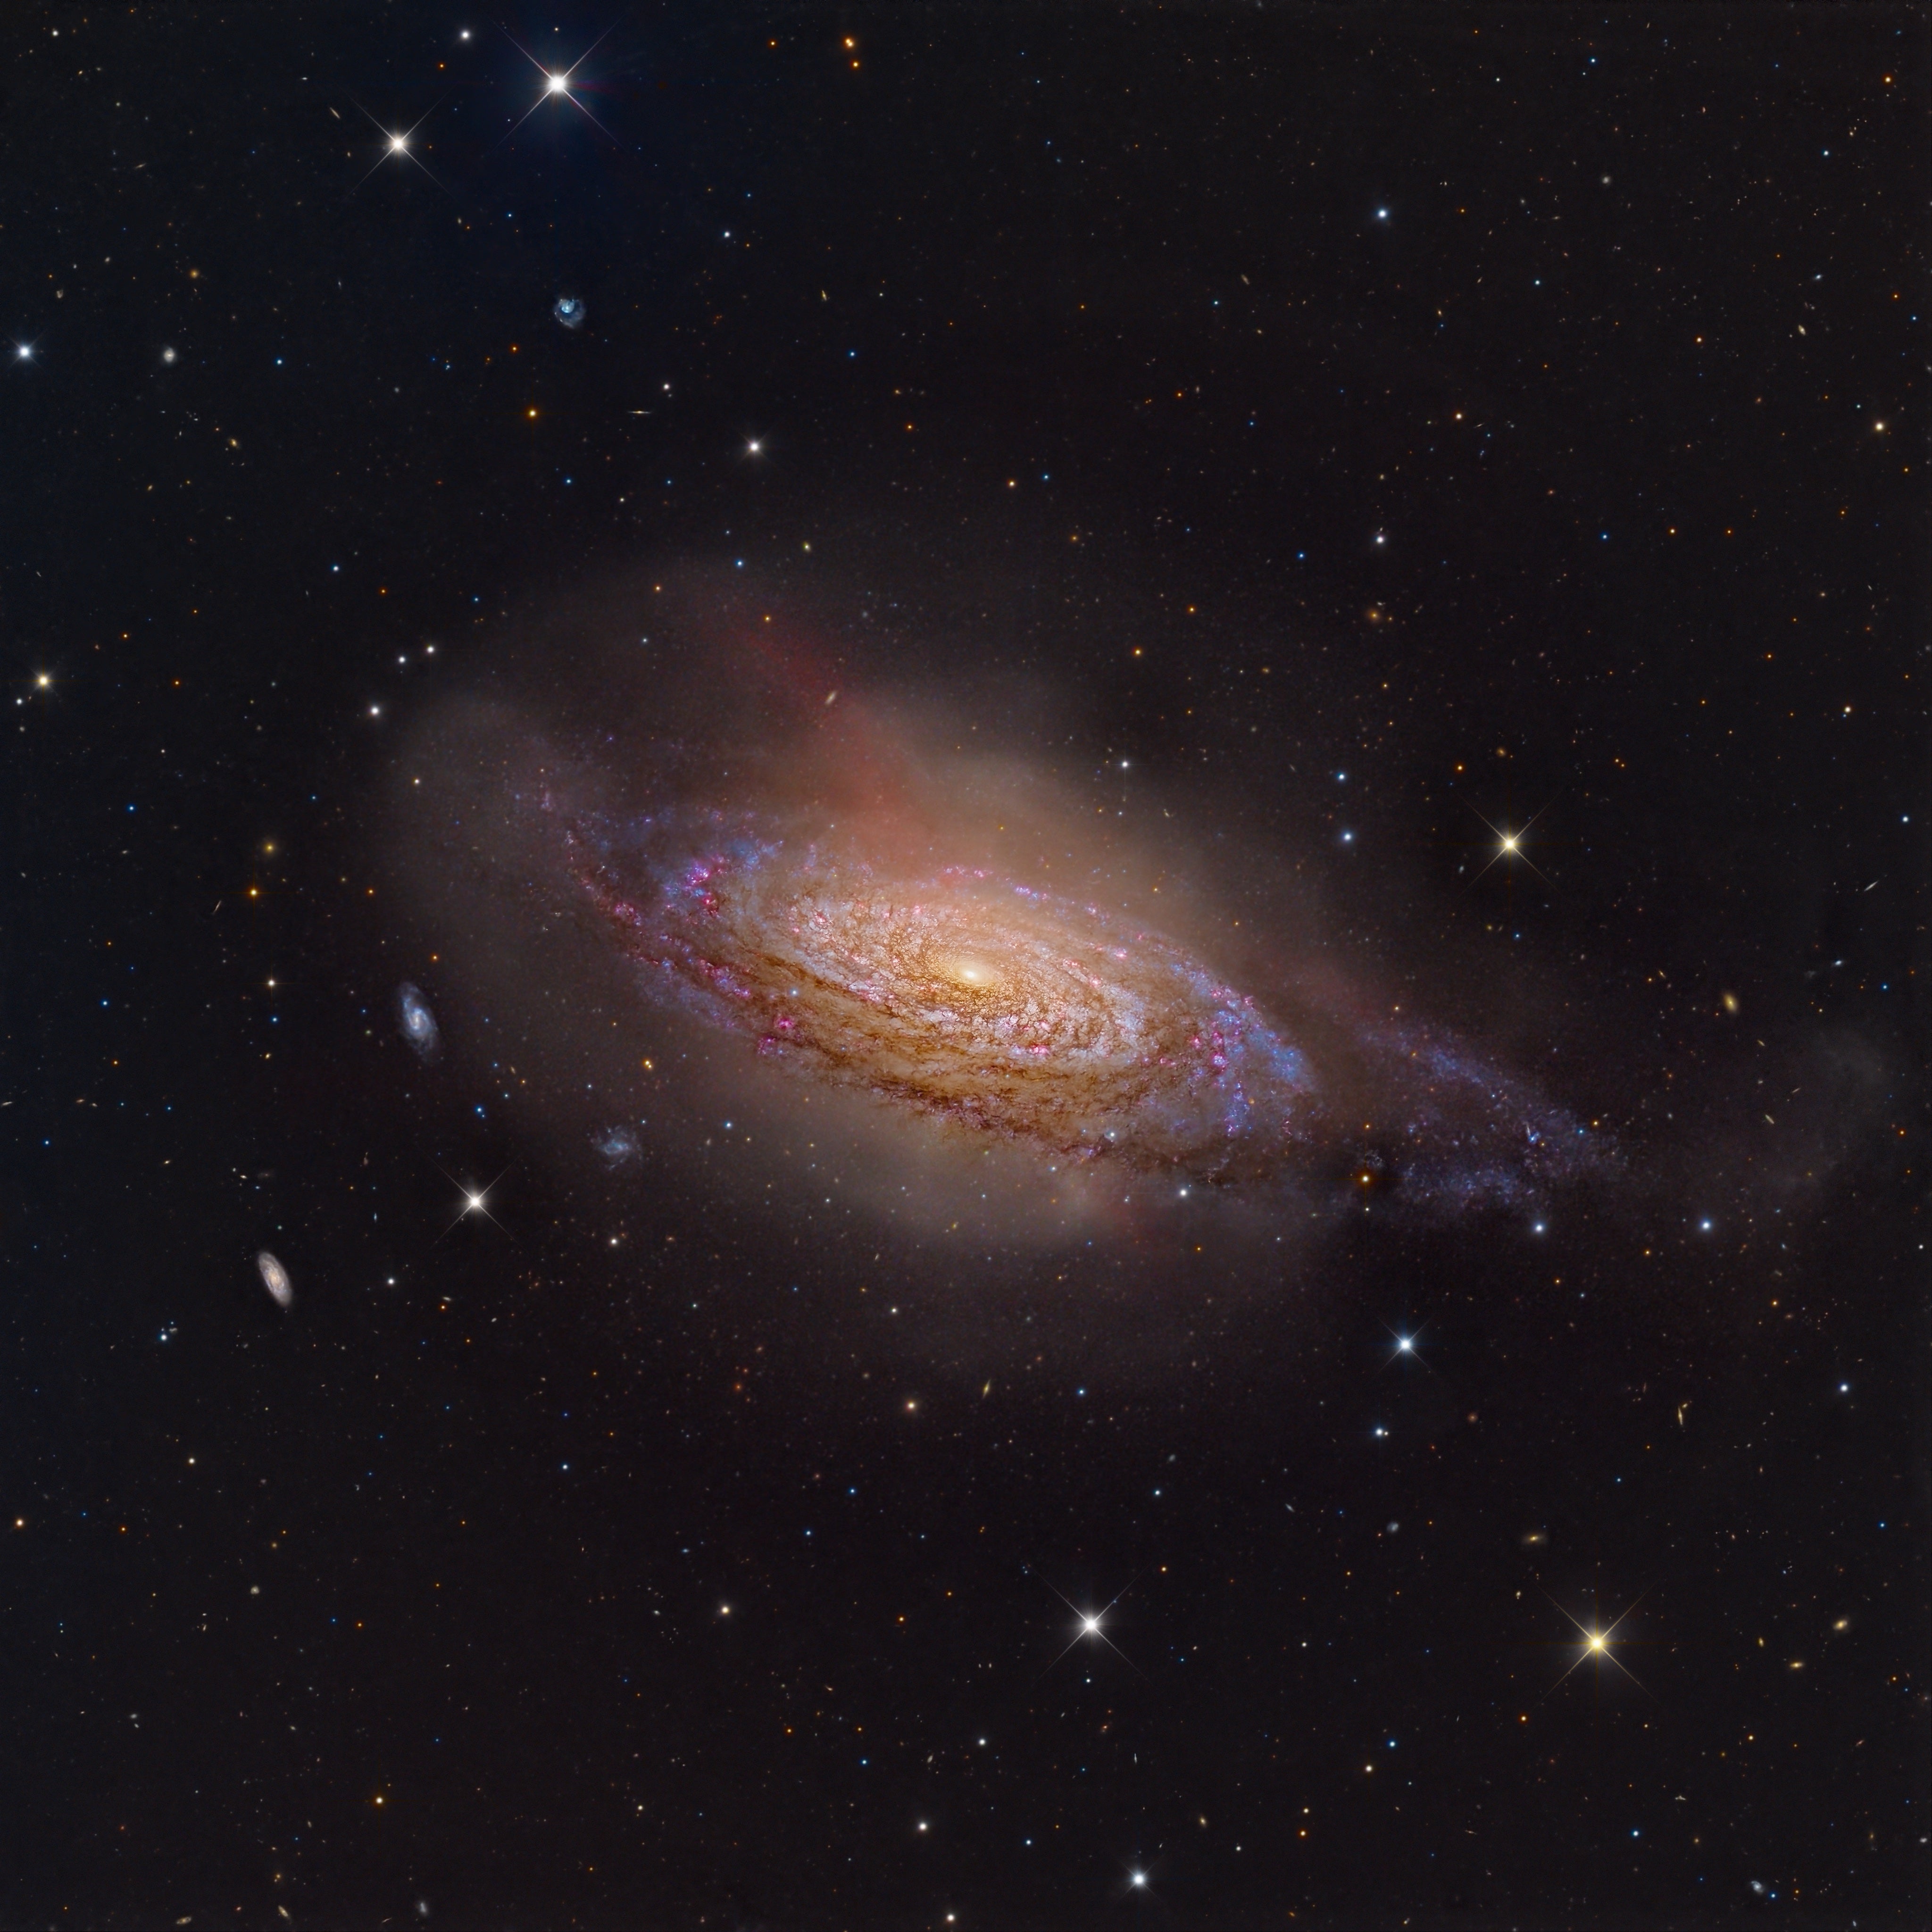 NGC 3521, a spiral galaxy. (Image: Mark Hanson; Mike Selby)